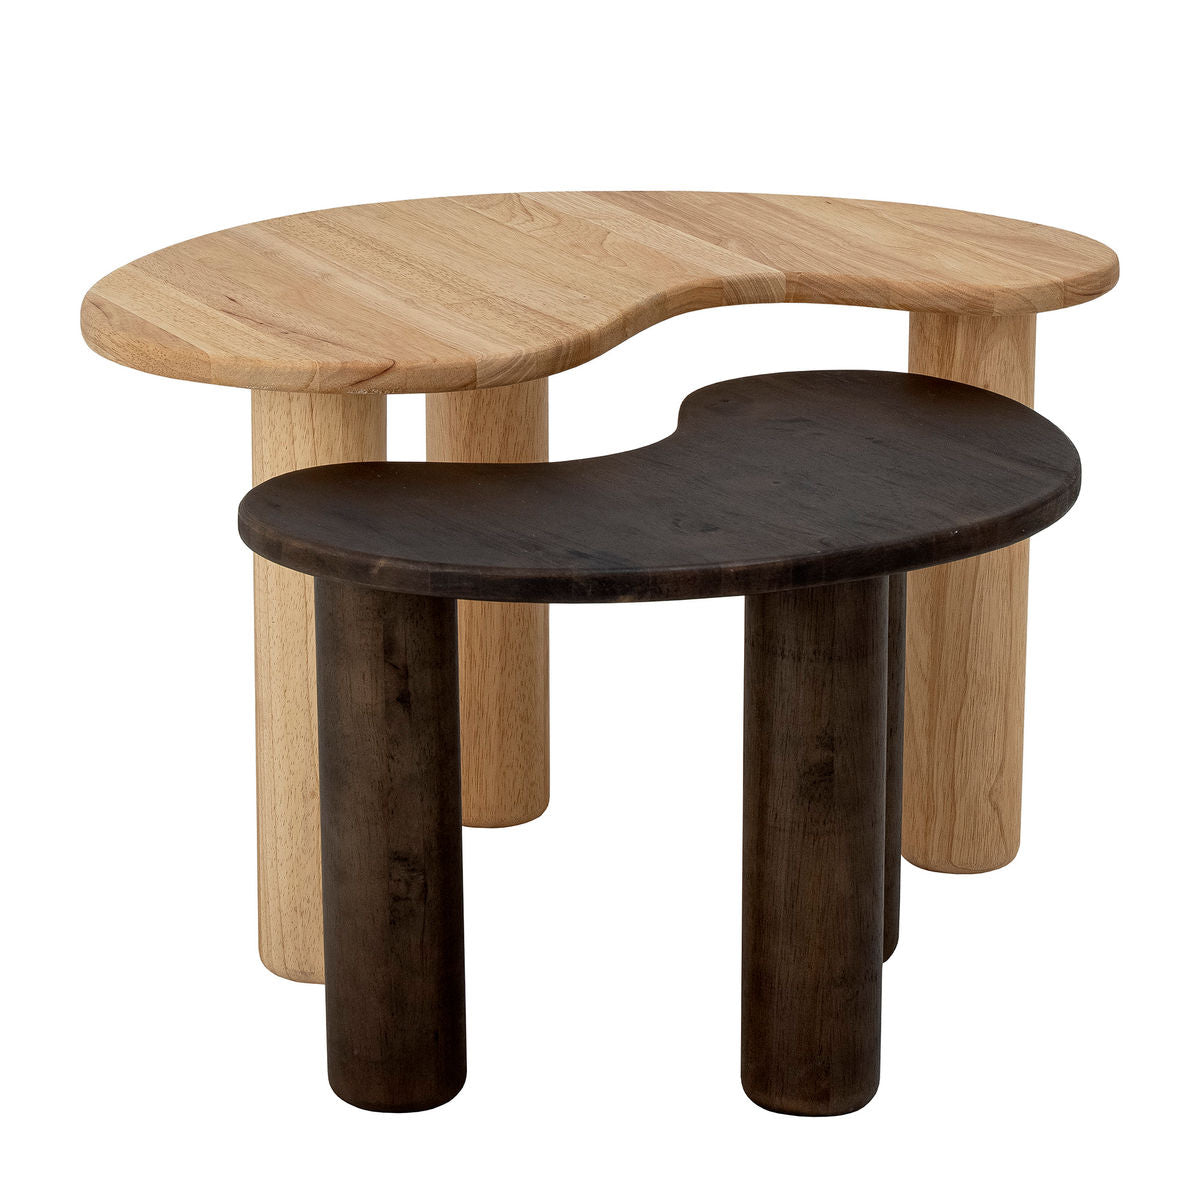 Bloomingville Luppa Cafetle Table, Nature, Rubber Tree